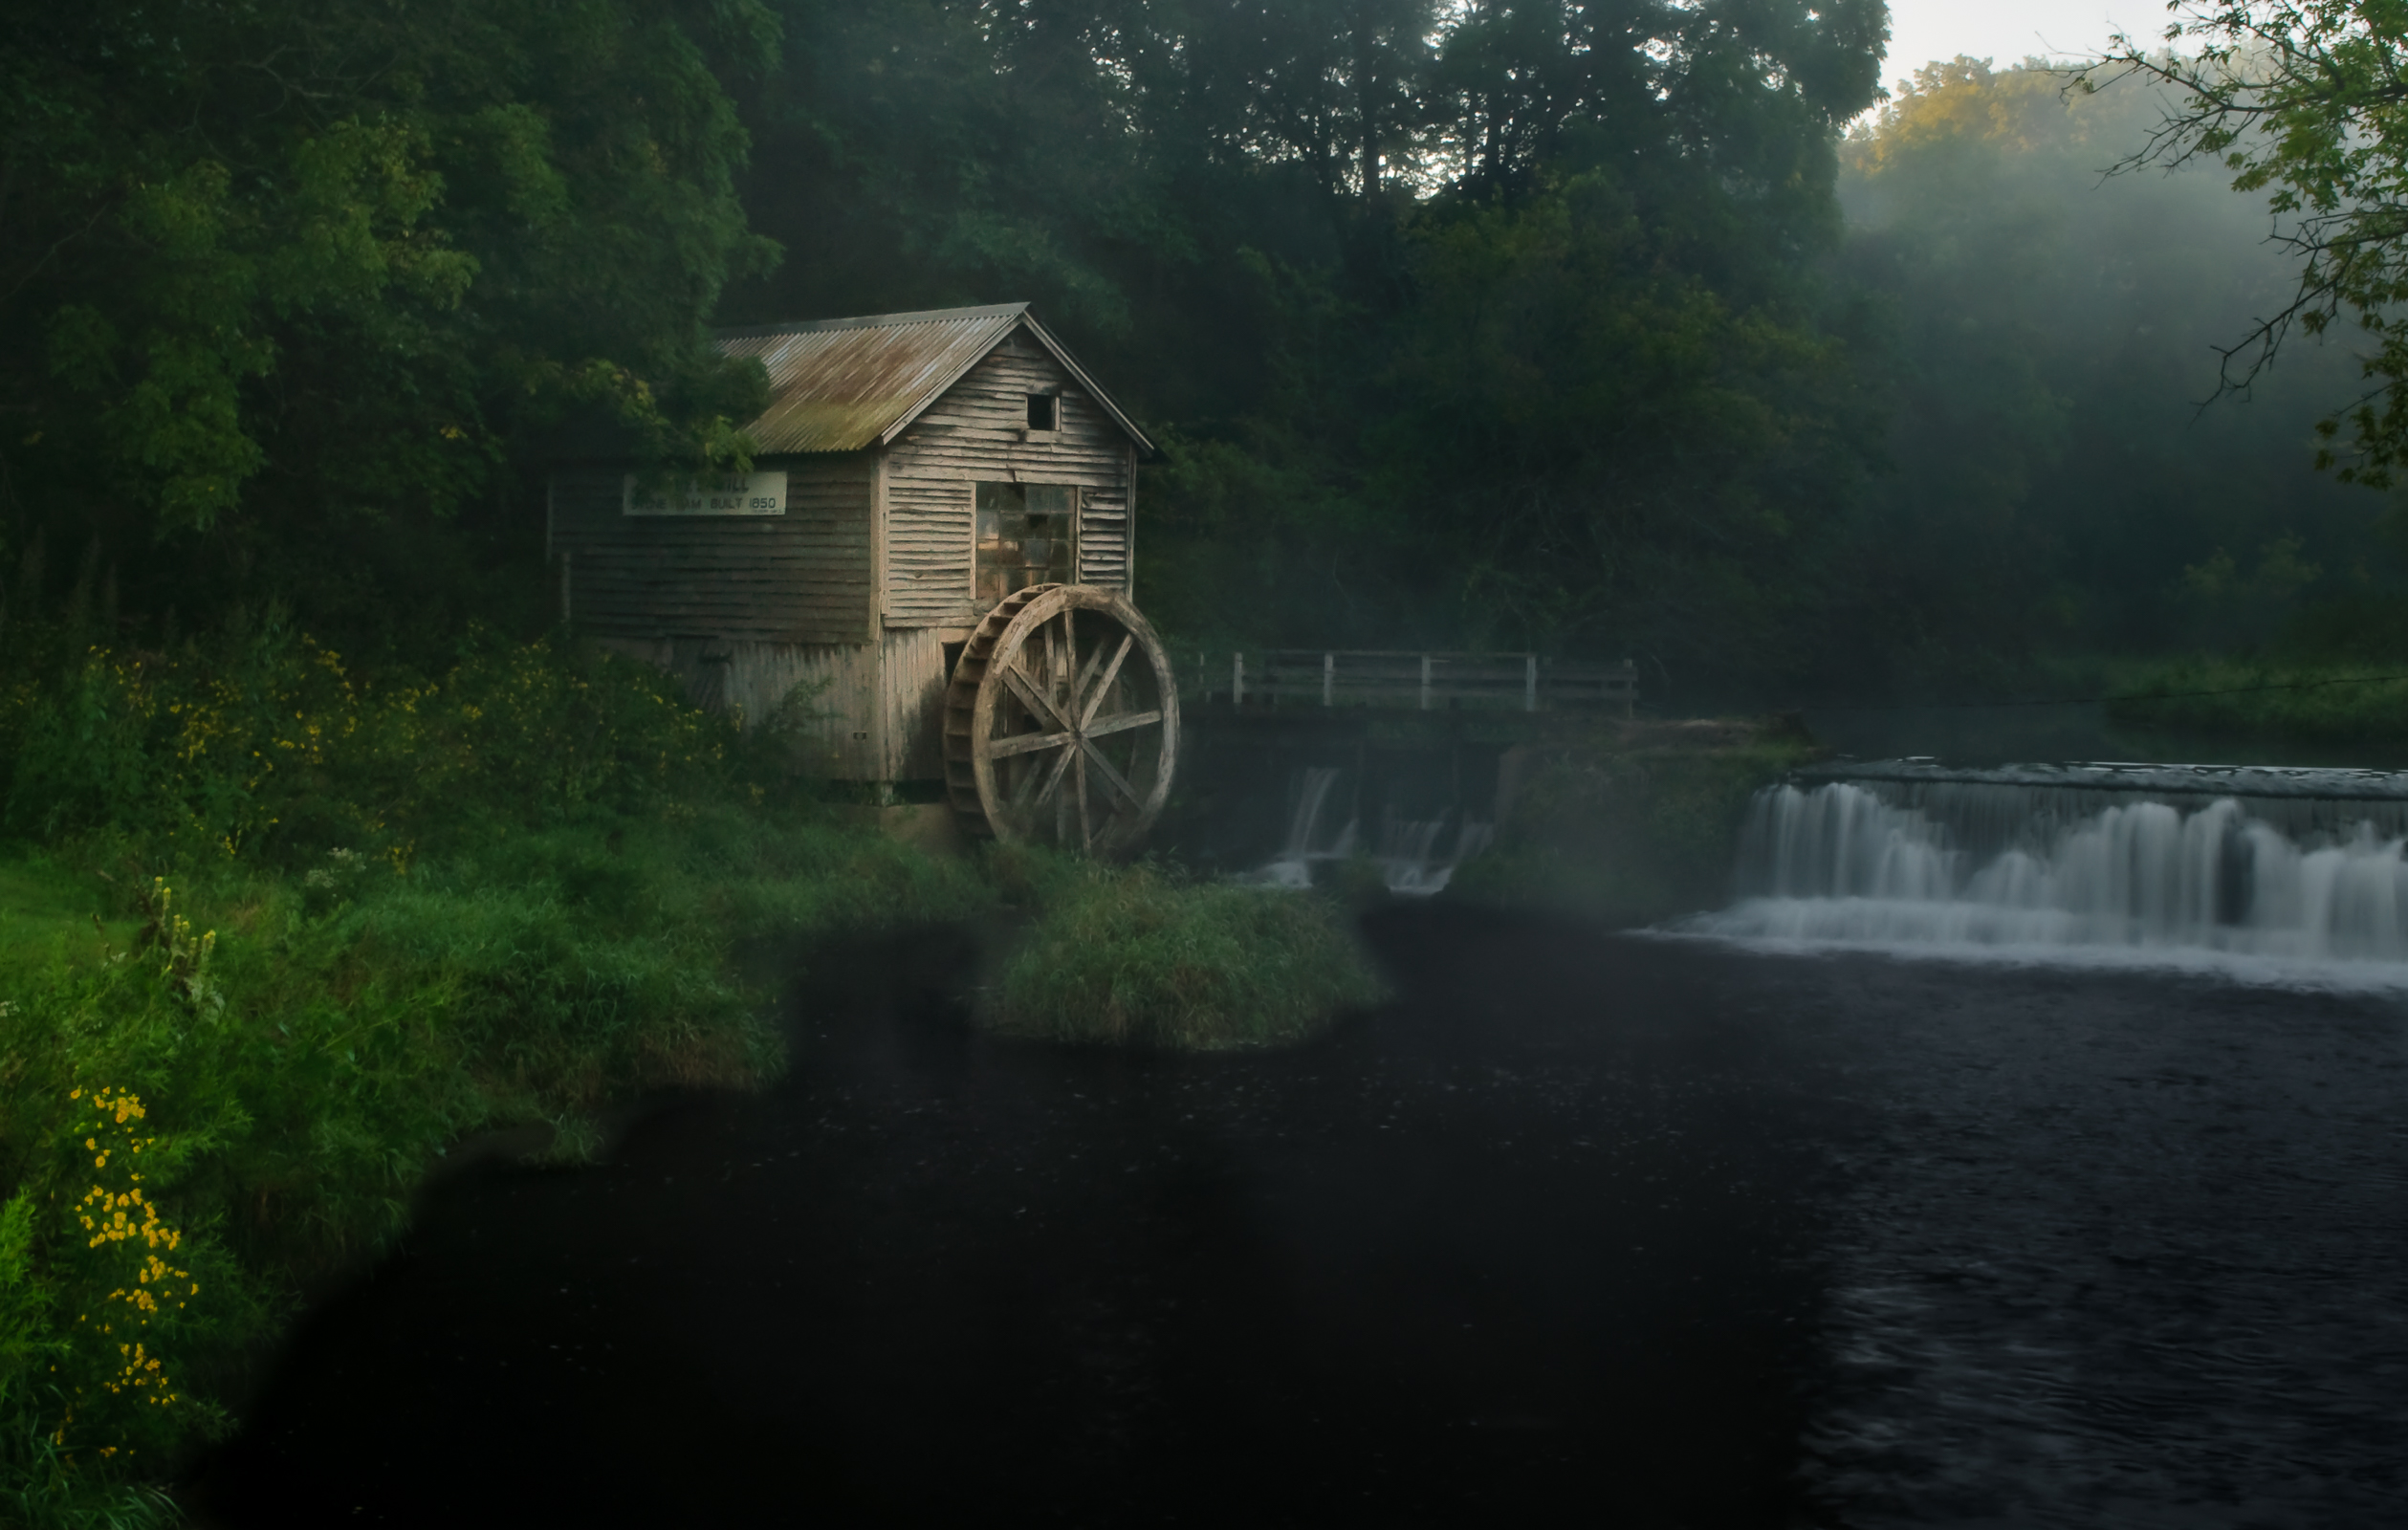 photograph of old wooden water wheel mill and dam in low light with thick green foliage and trees surrounding it